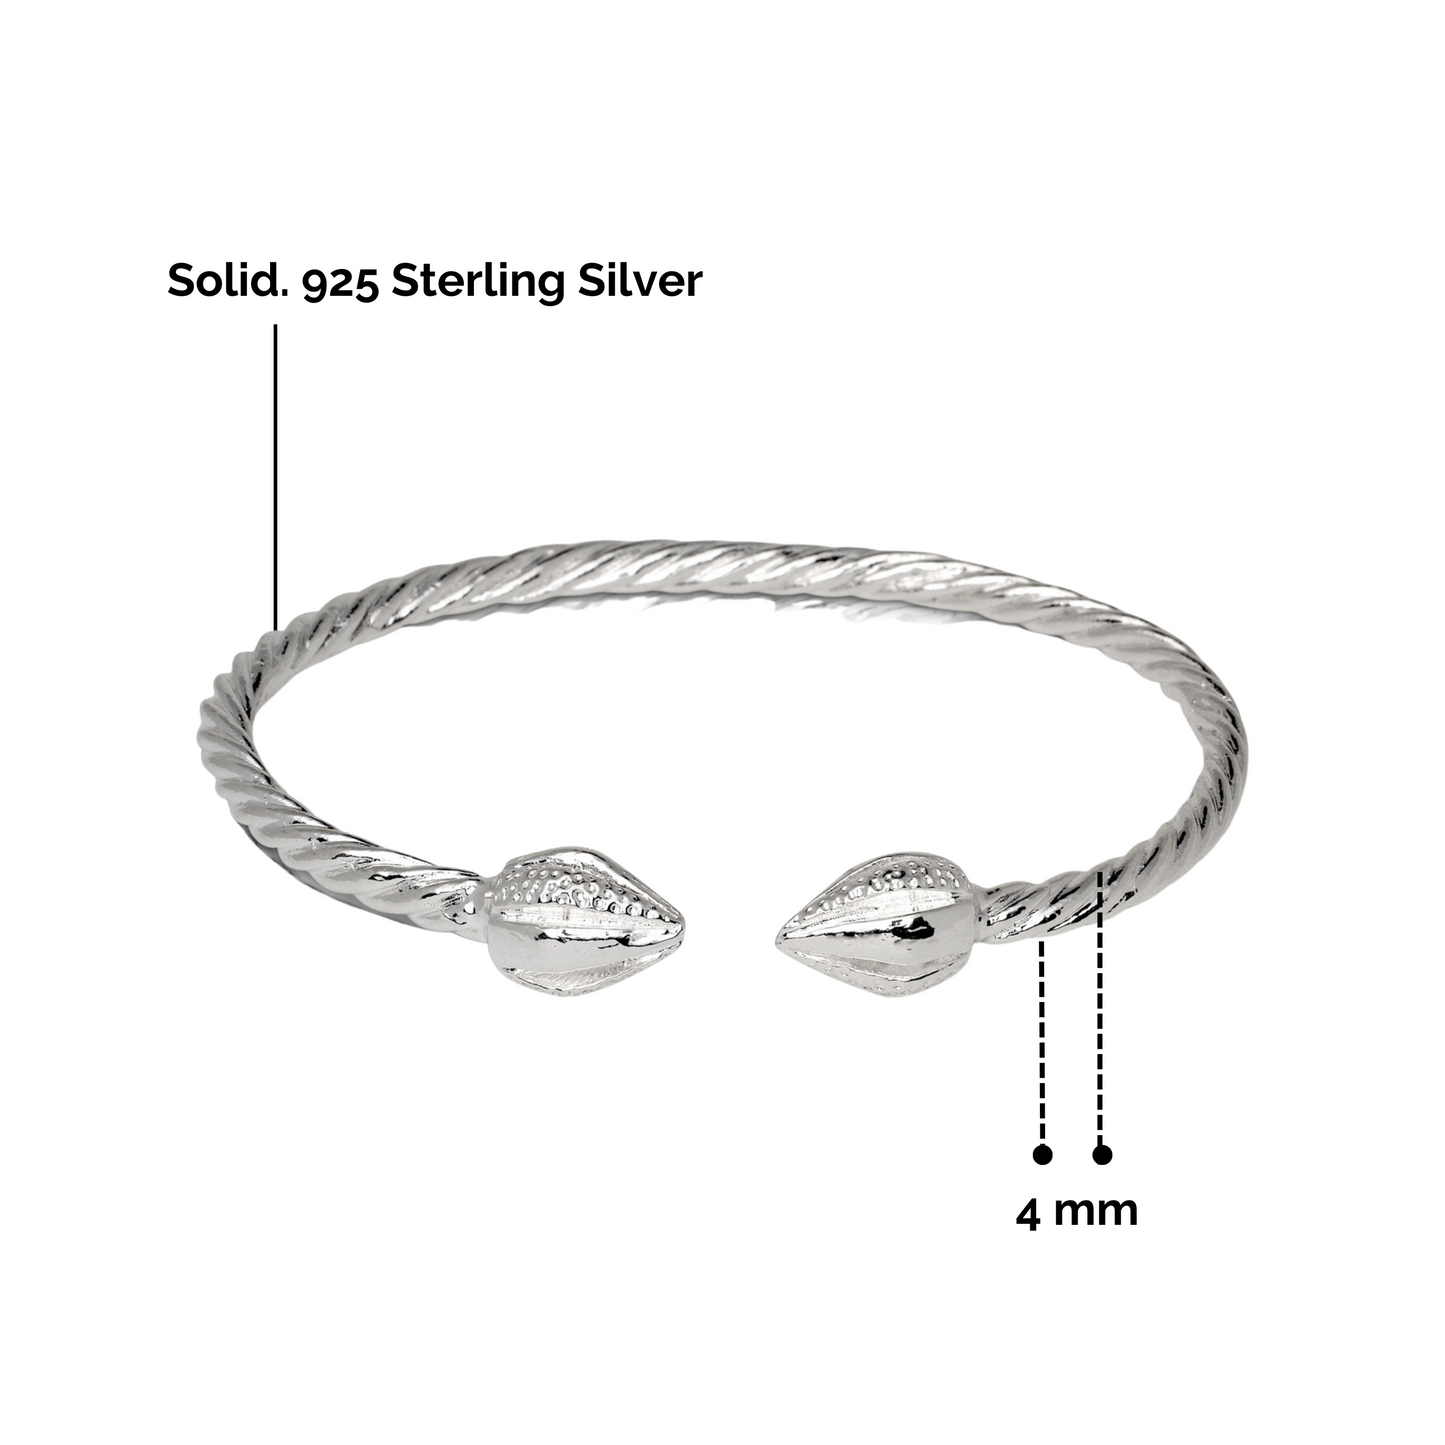 Better Jewelry Cocoa Pod Ends Coiled Rope West Indian Bangle .925 Sterling Silver, 1 piece